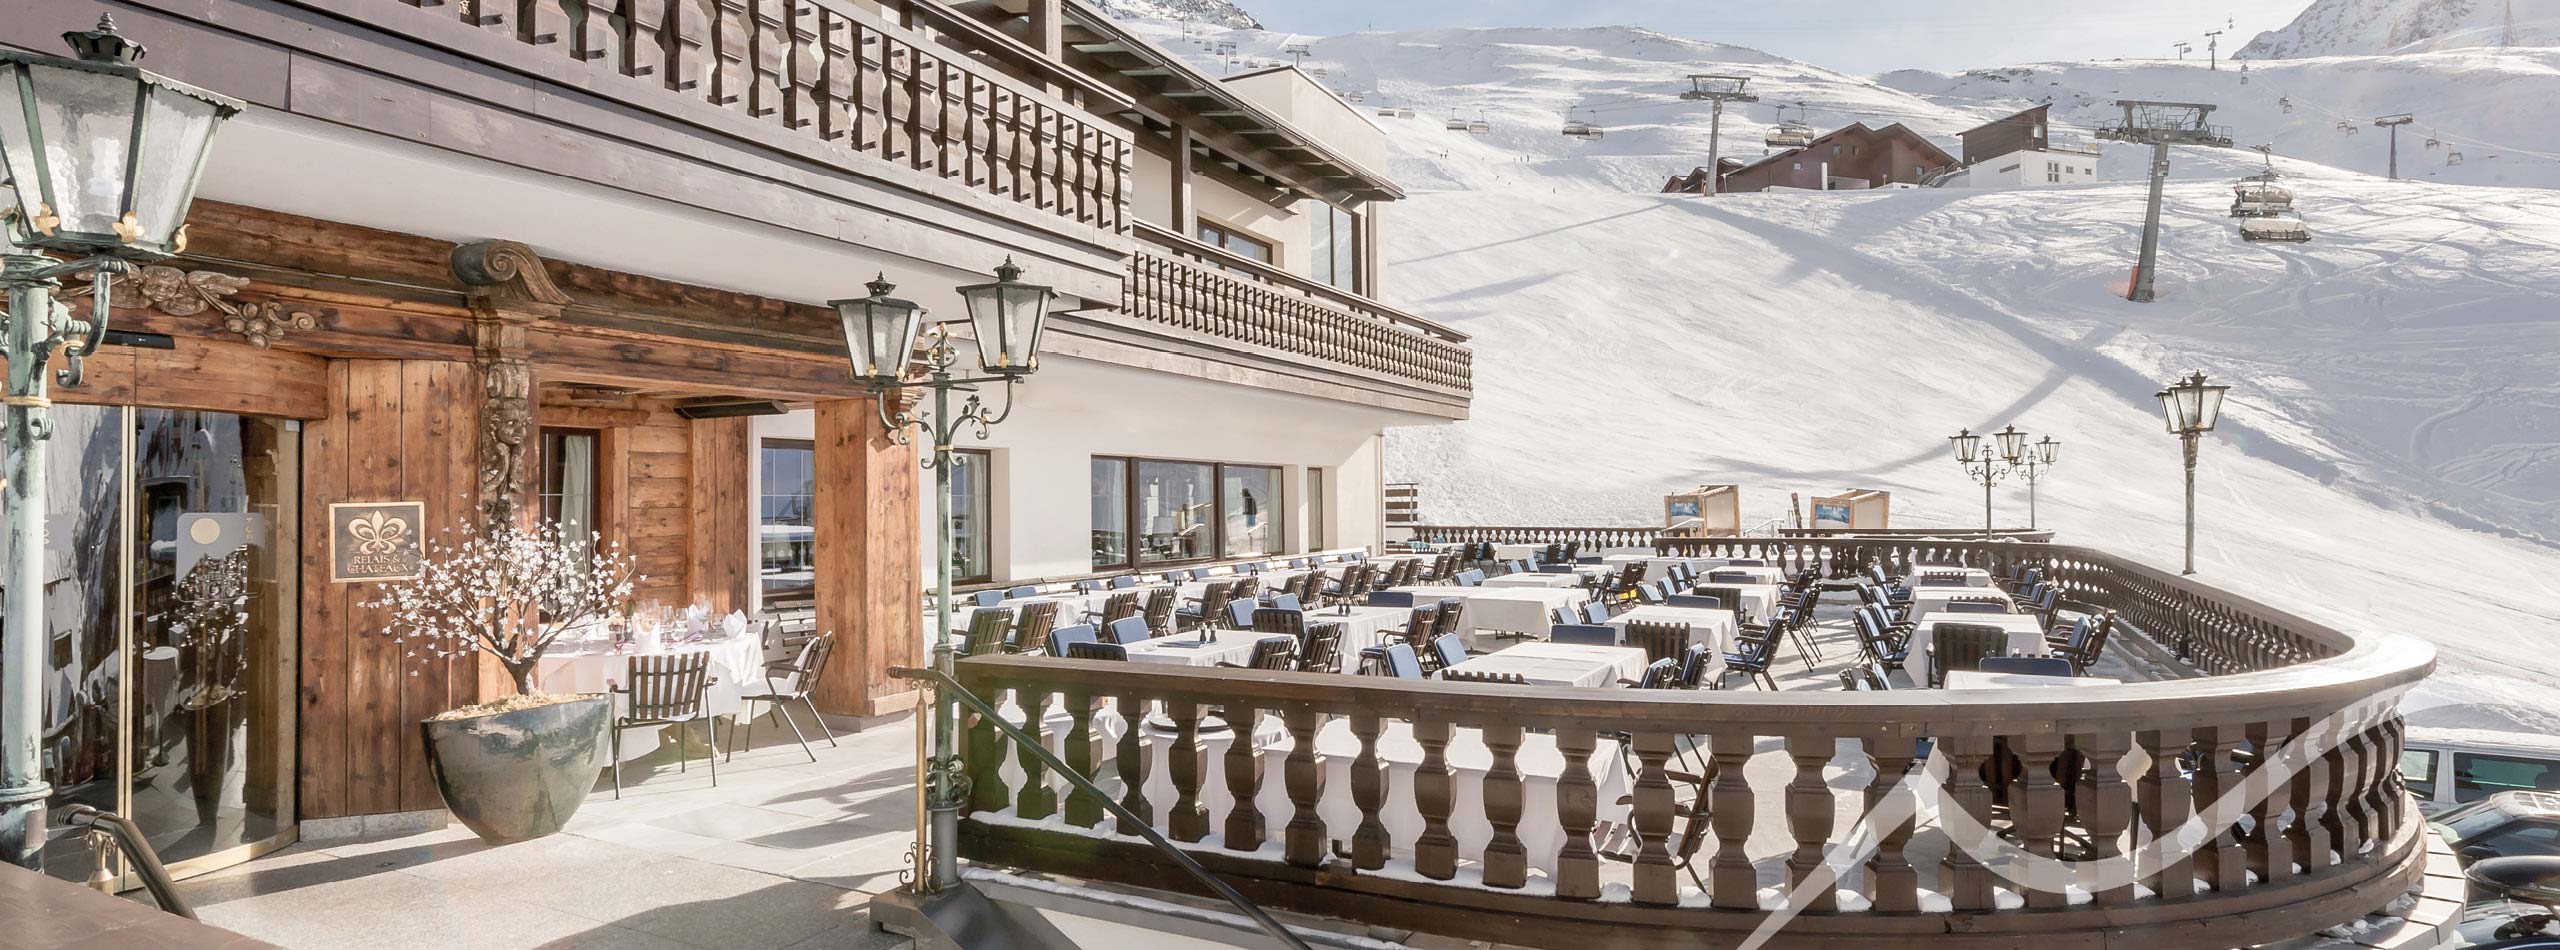 Deluxe gastronomy and panorama for ski gourmets on the piste-side sun terrace